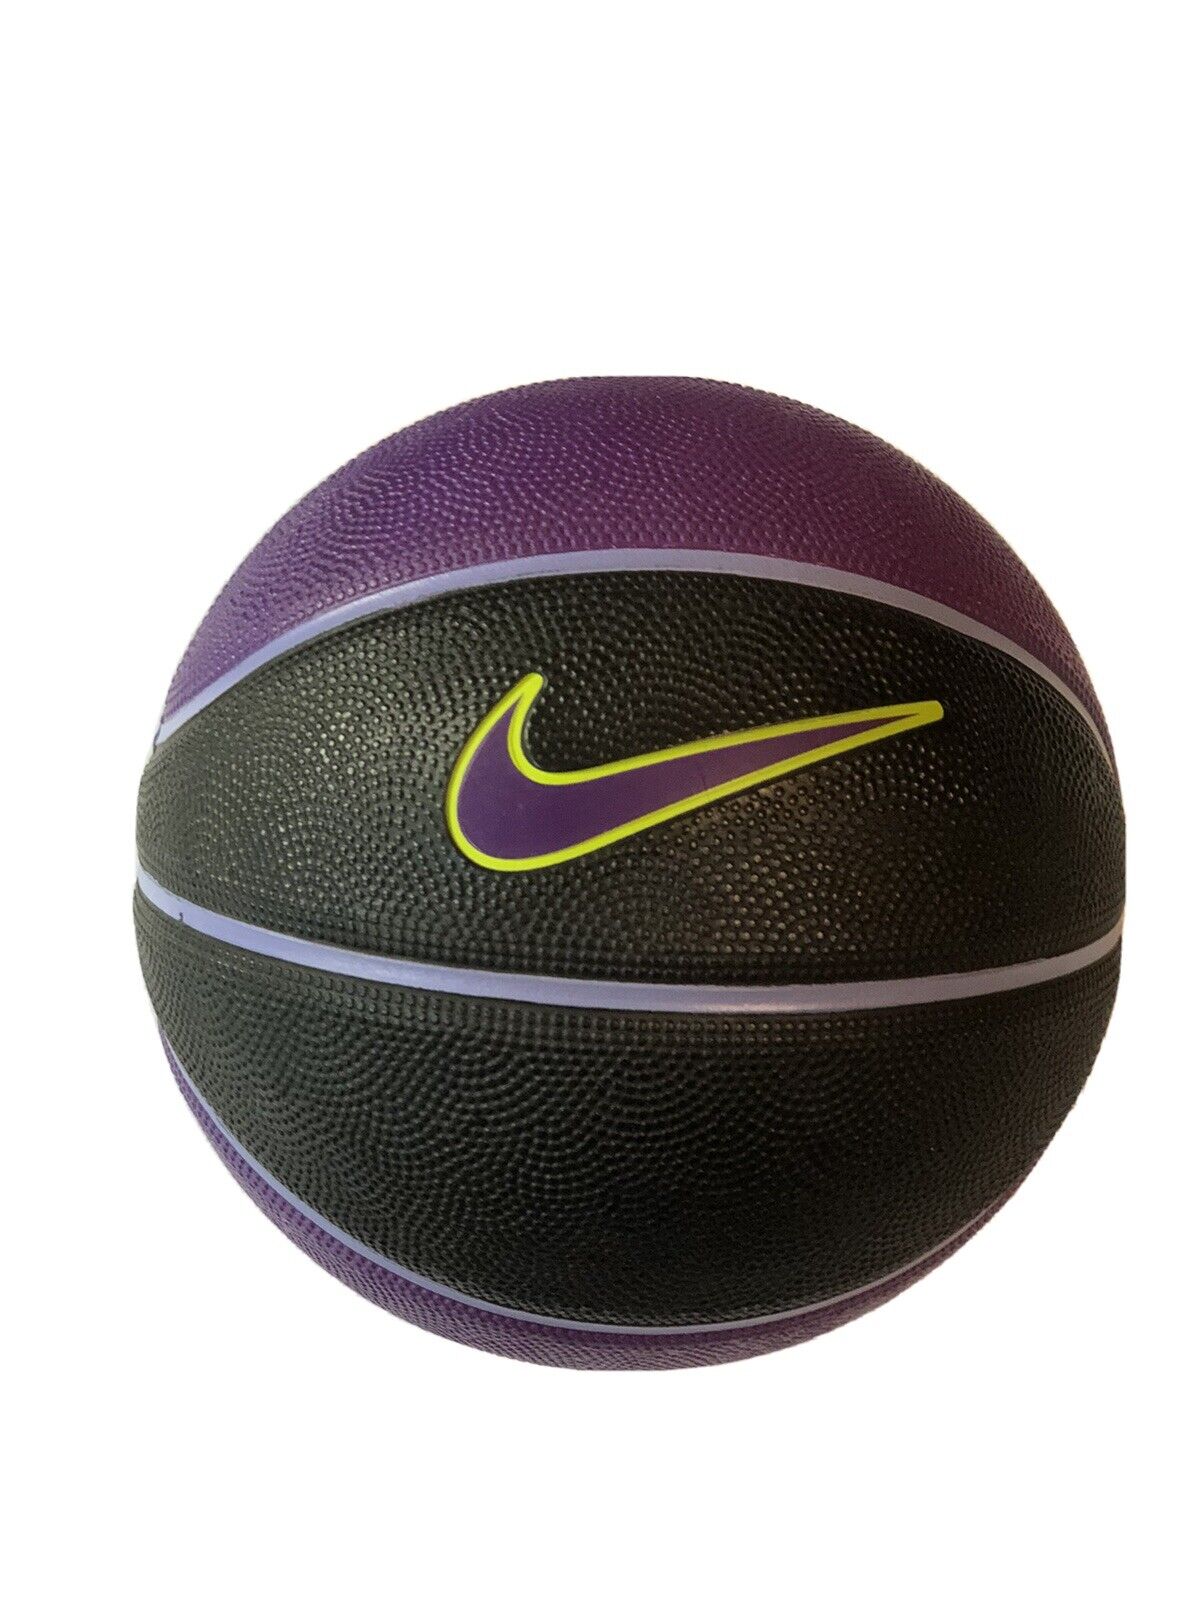 Large-scale sale Basketball 7” Nike Surprise price Toy